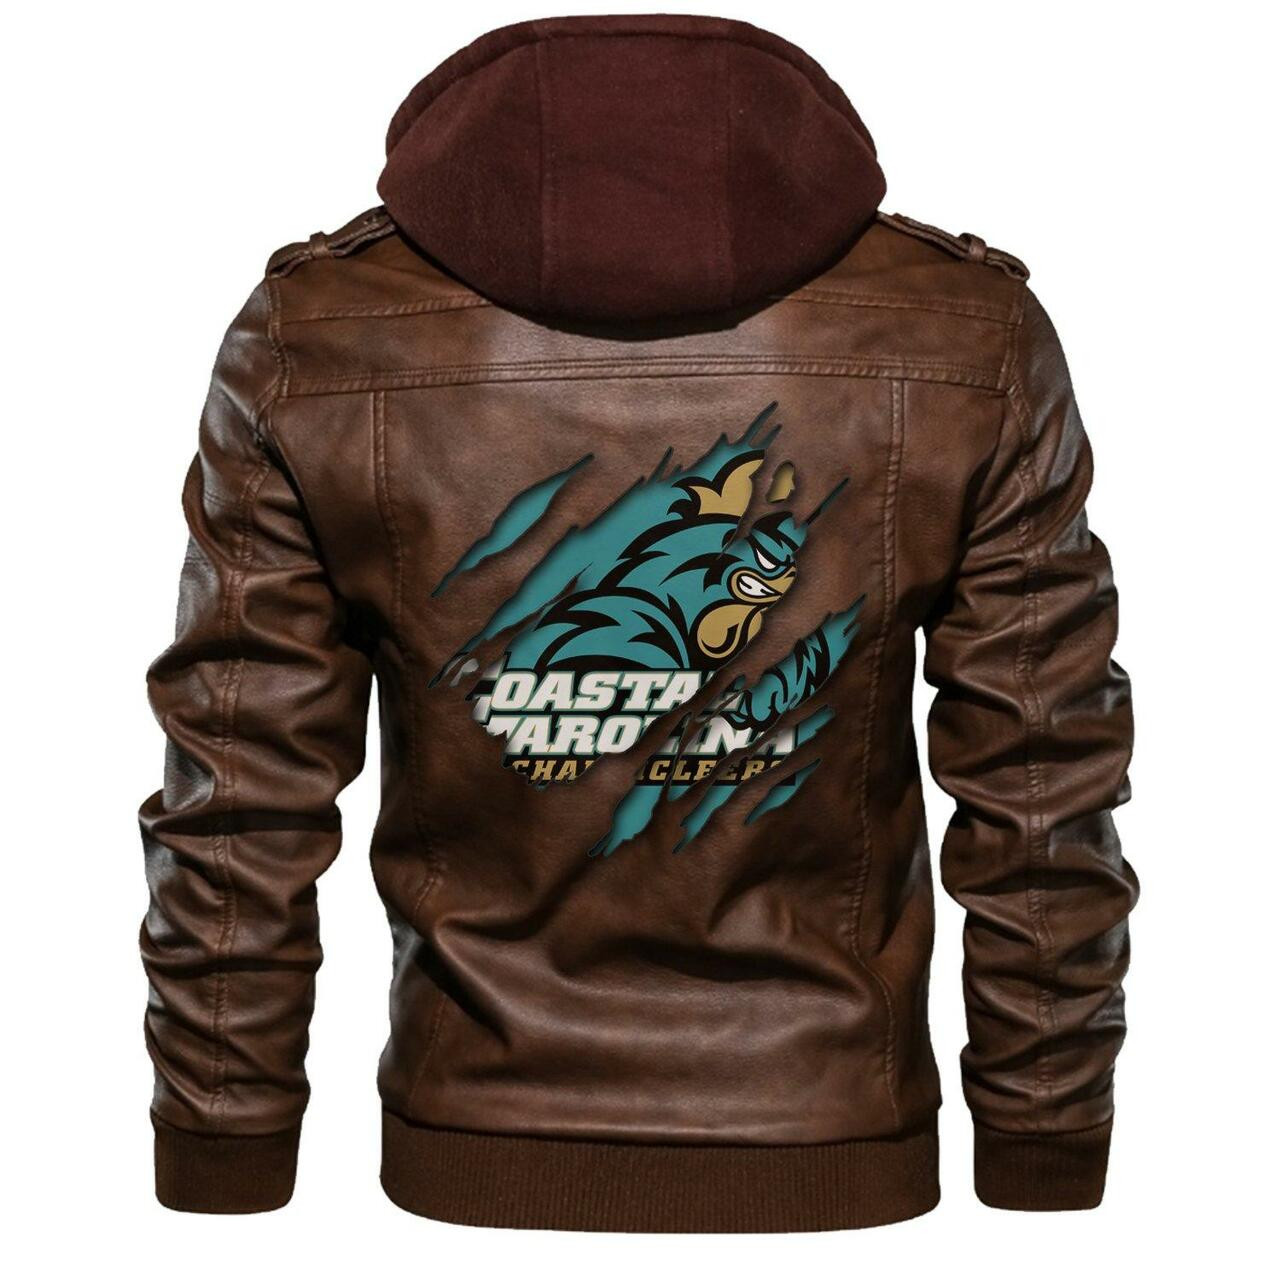 Check out our collection of the latest and greatest leather jacket 163